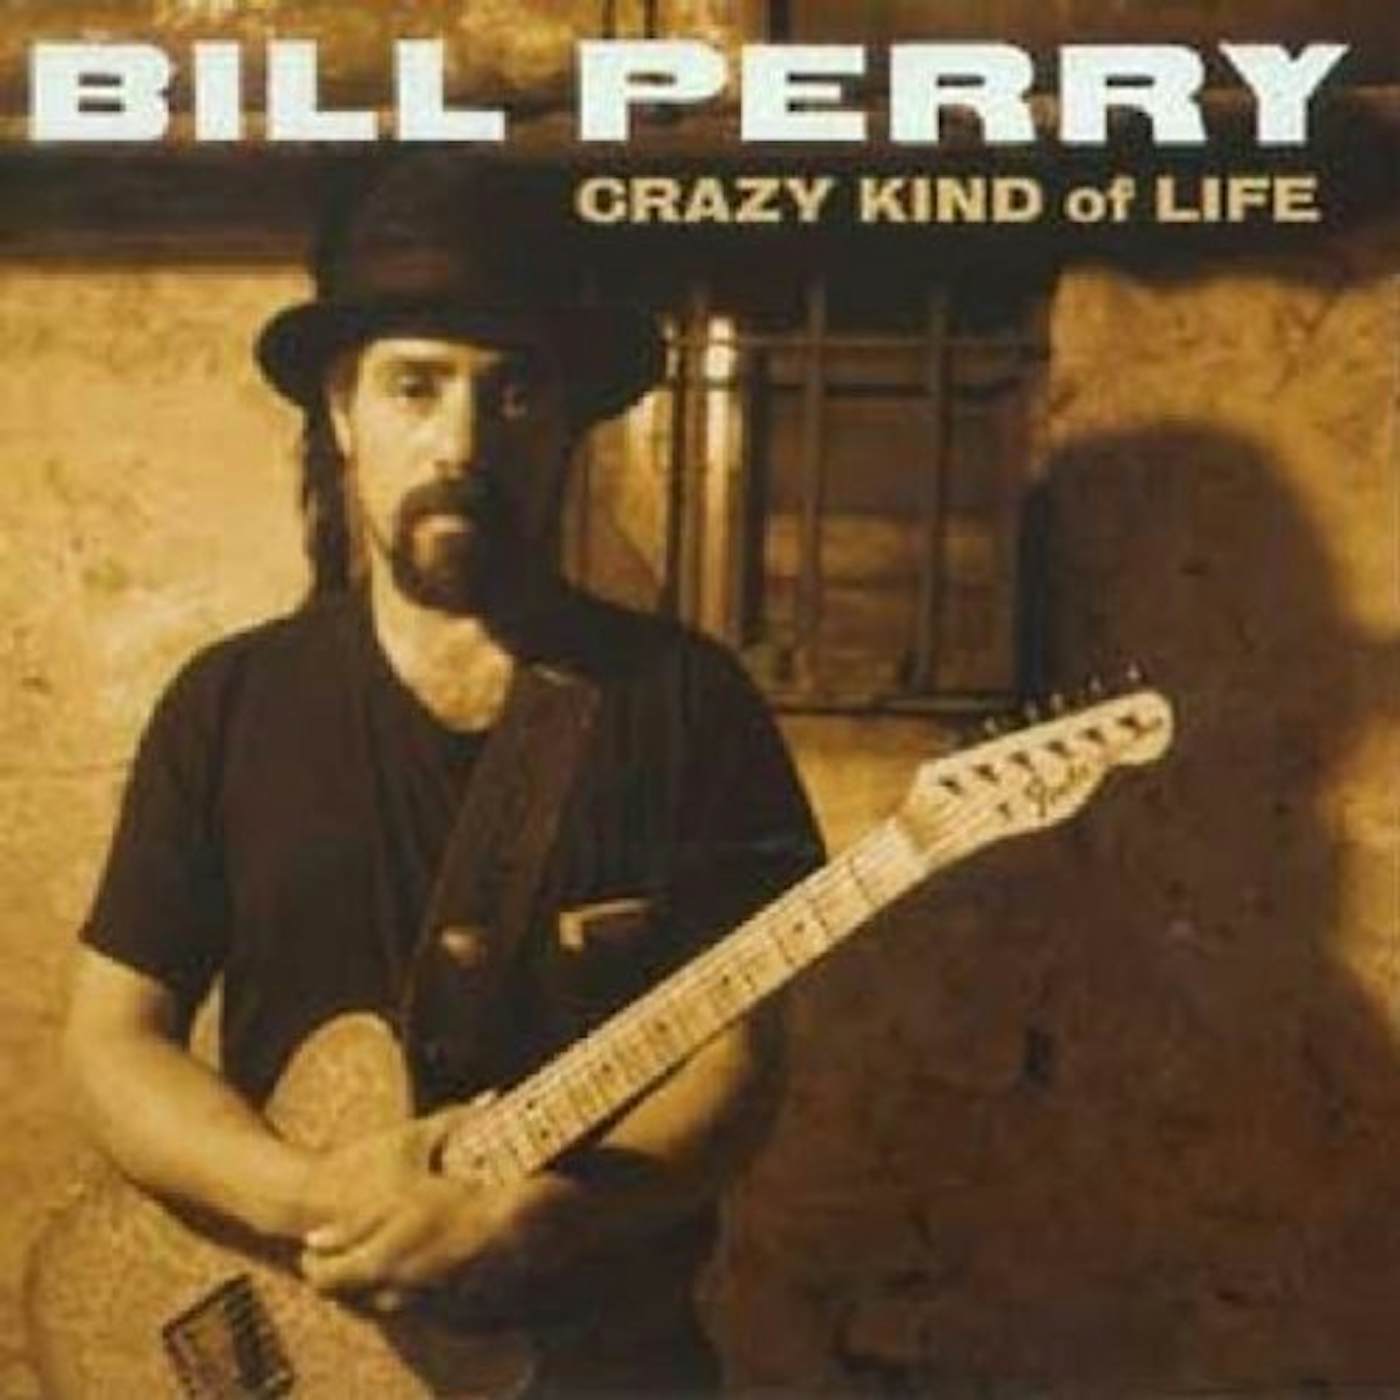 Bill Perry CRAZY KIND OF LIFE CD